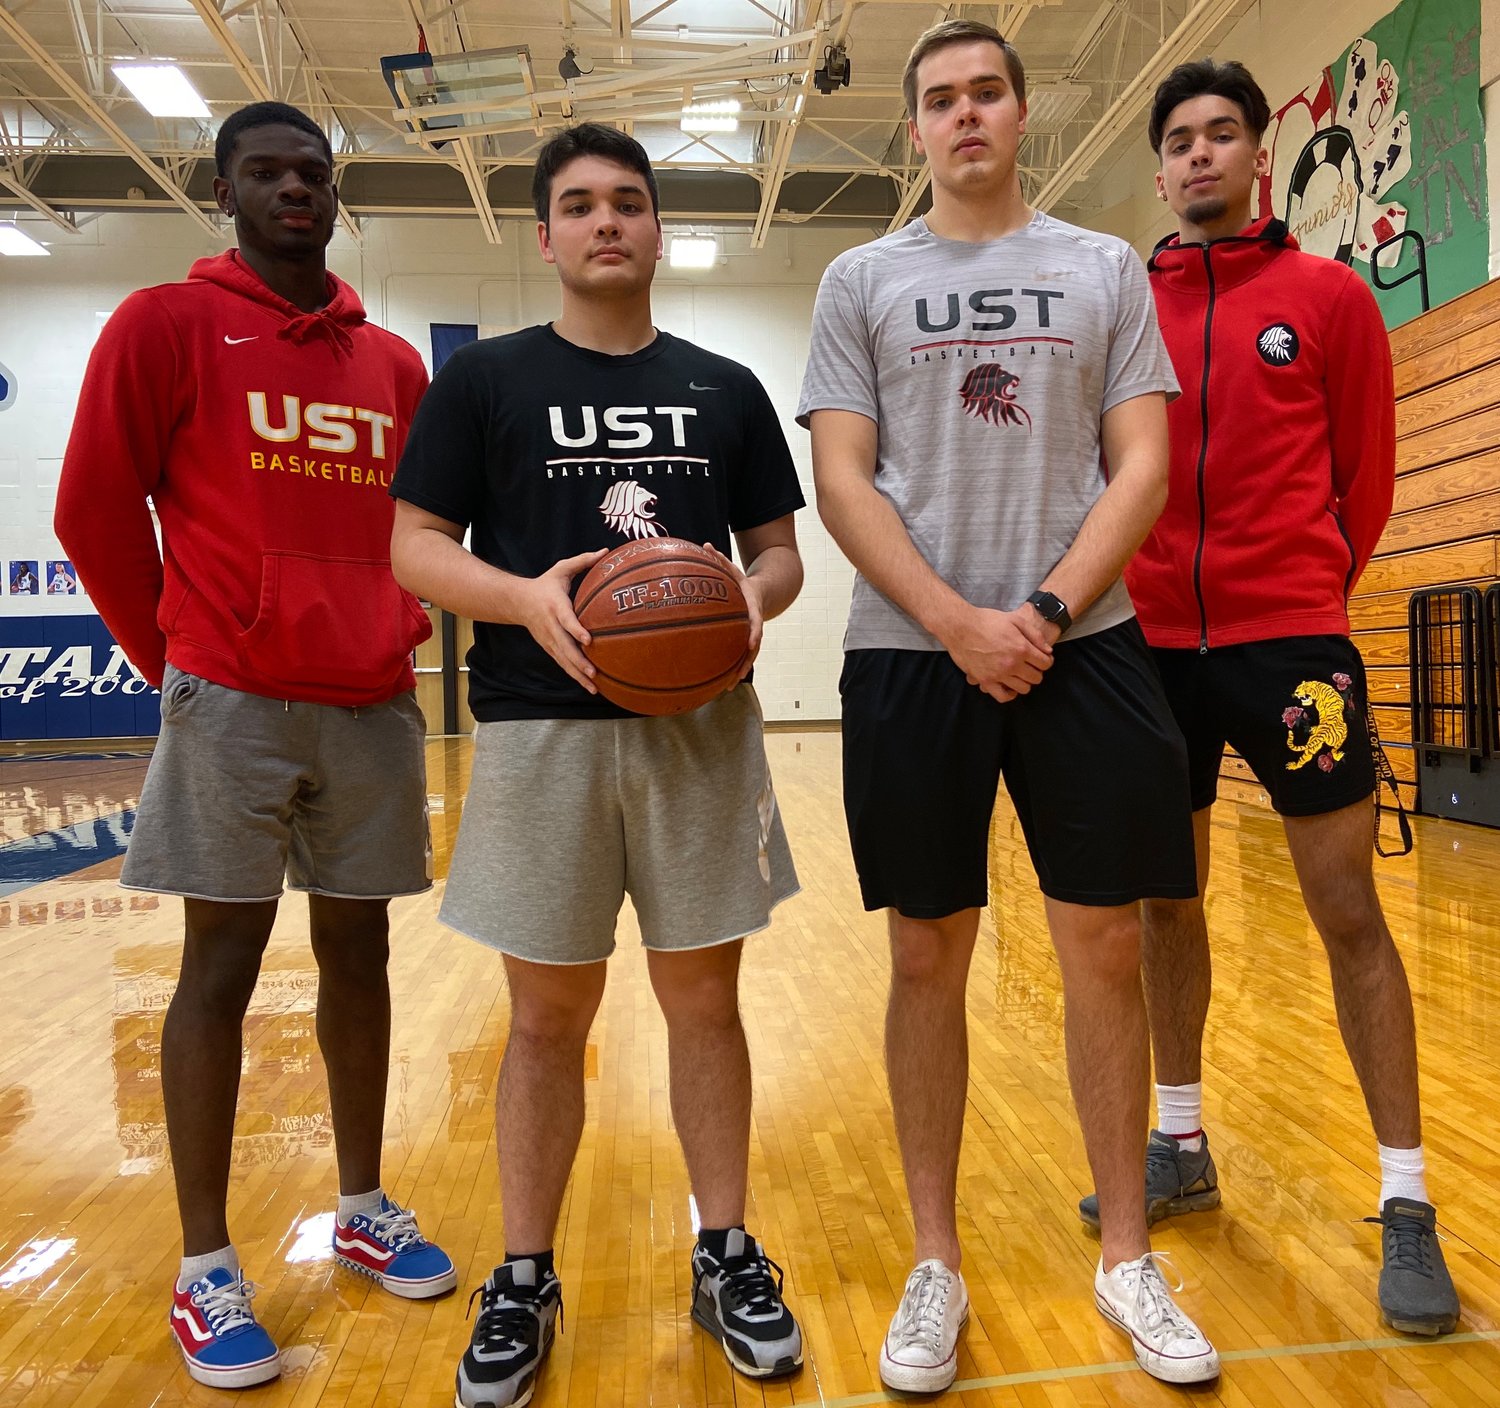 From left to right, Katy natives Andrew Adebo, Austin Arnold, Nathan Thormaehlen and Nestor Daboin are part of a blossoming University of St. Thomas men’s basketball program.